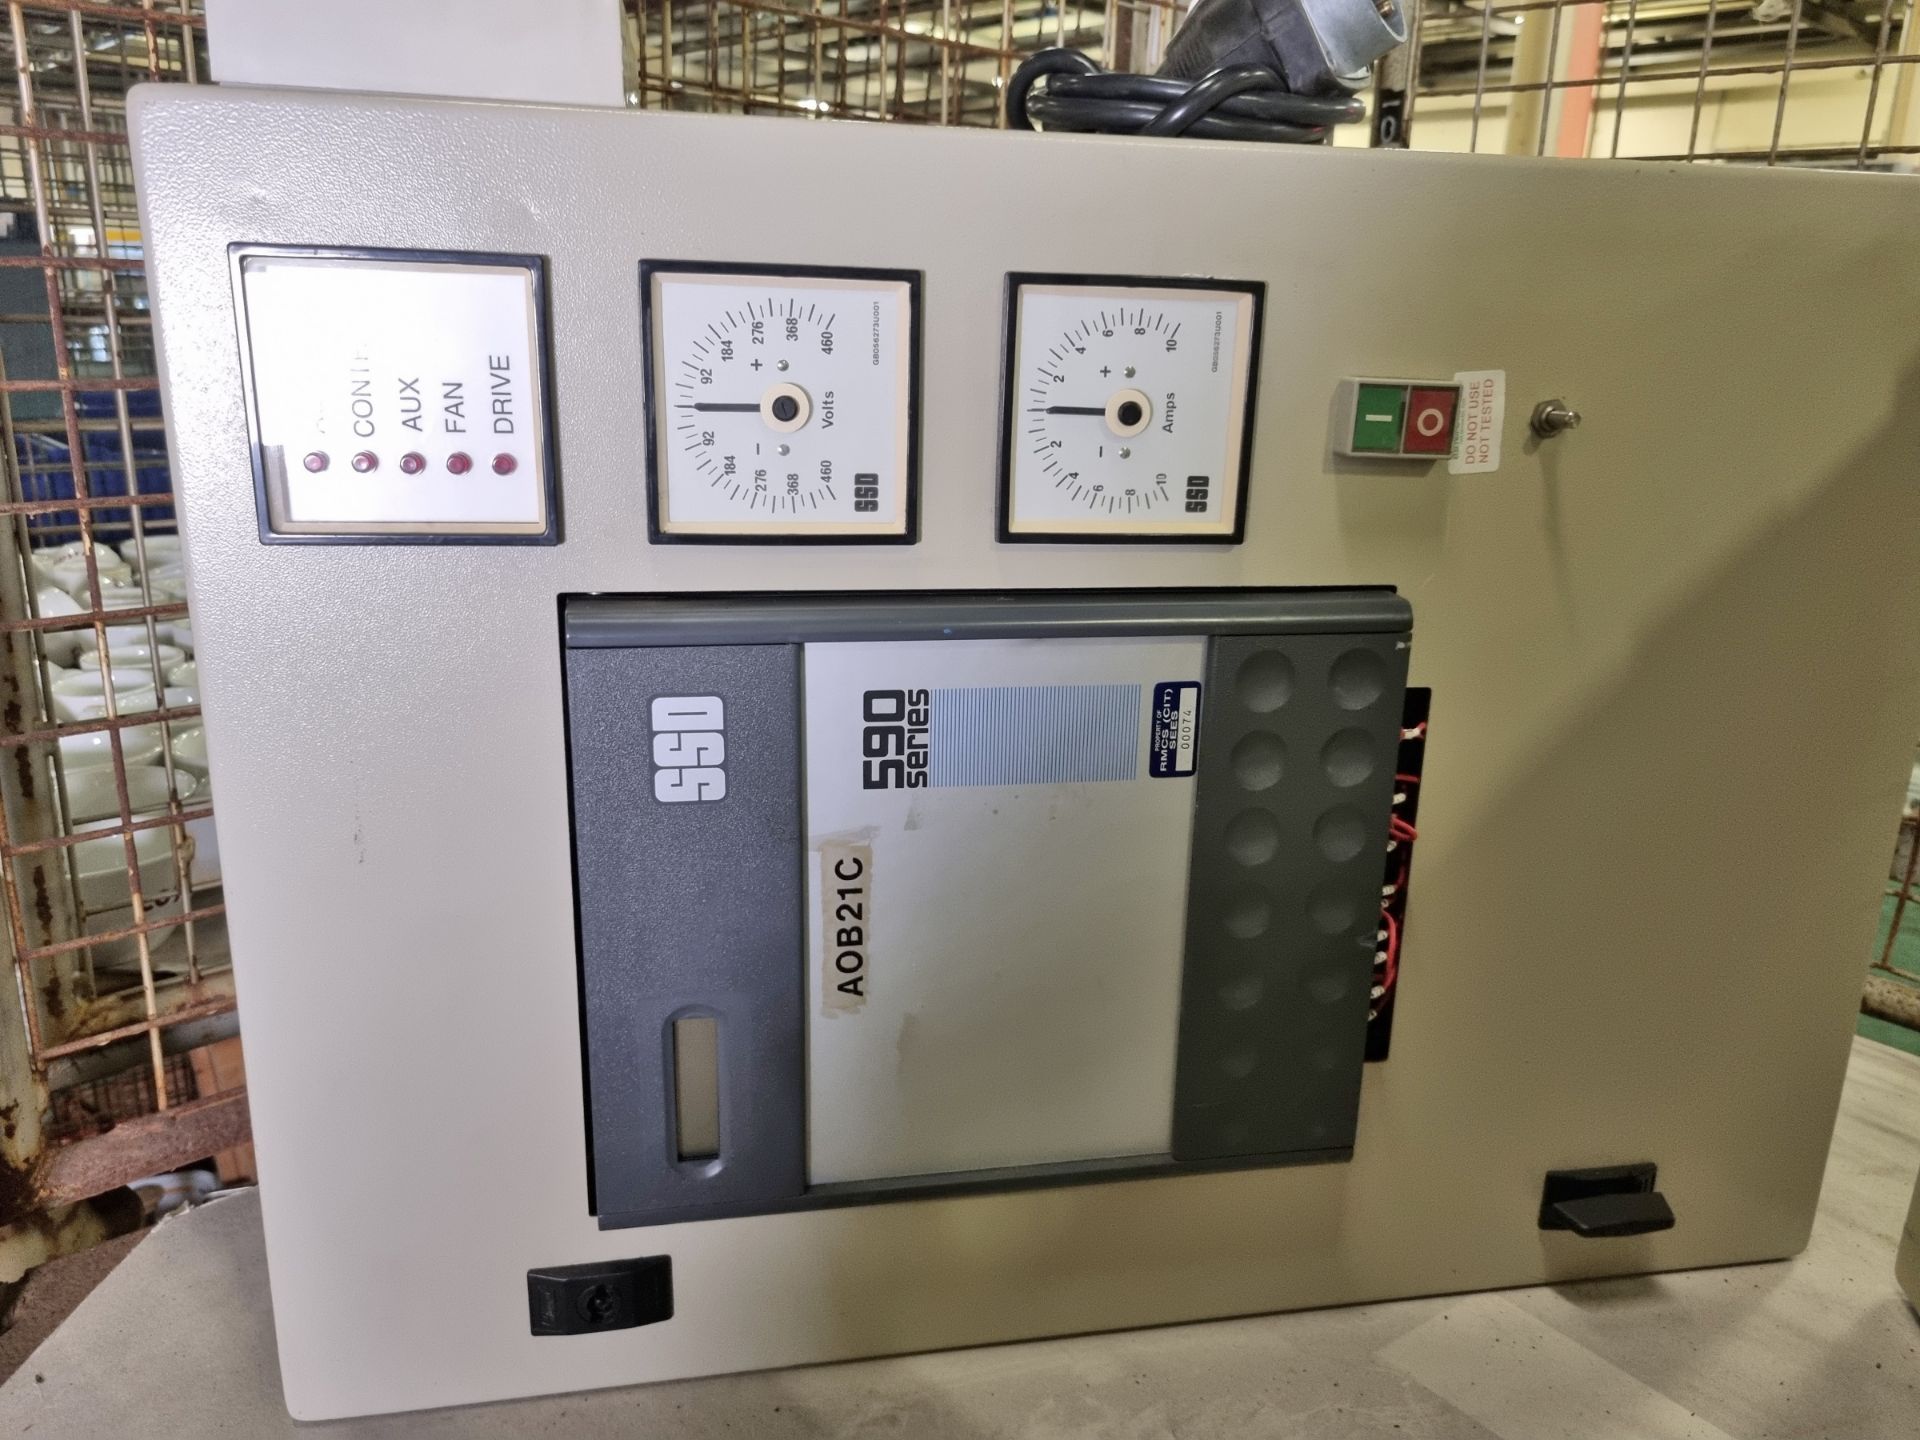 2x 590 Series voltage control panels - 500V 32A - L57xW70xH22cm - Image 4 of 8